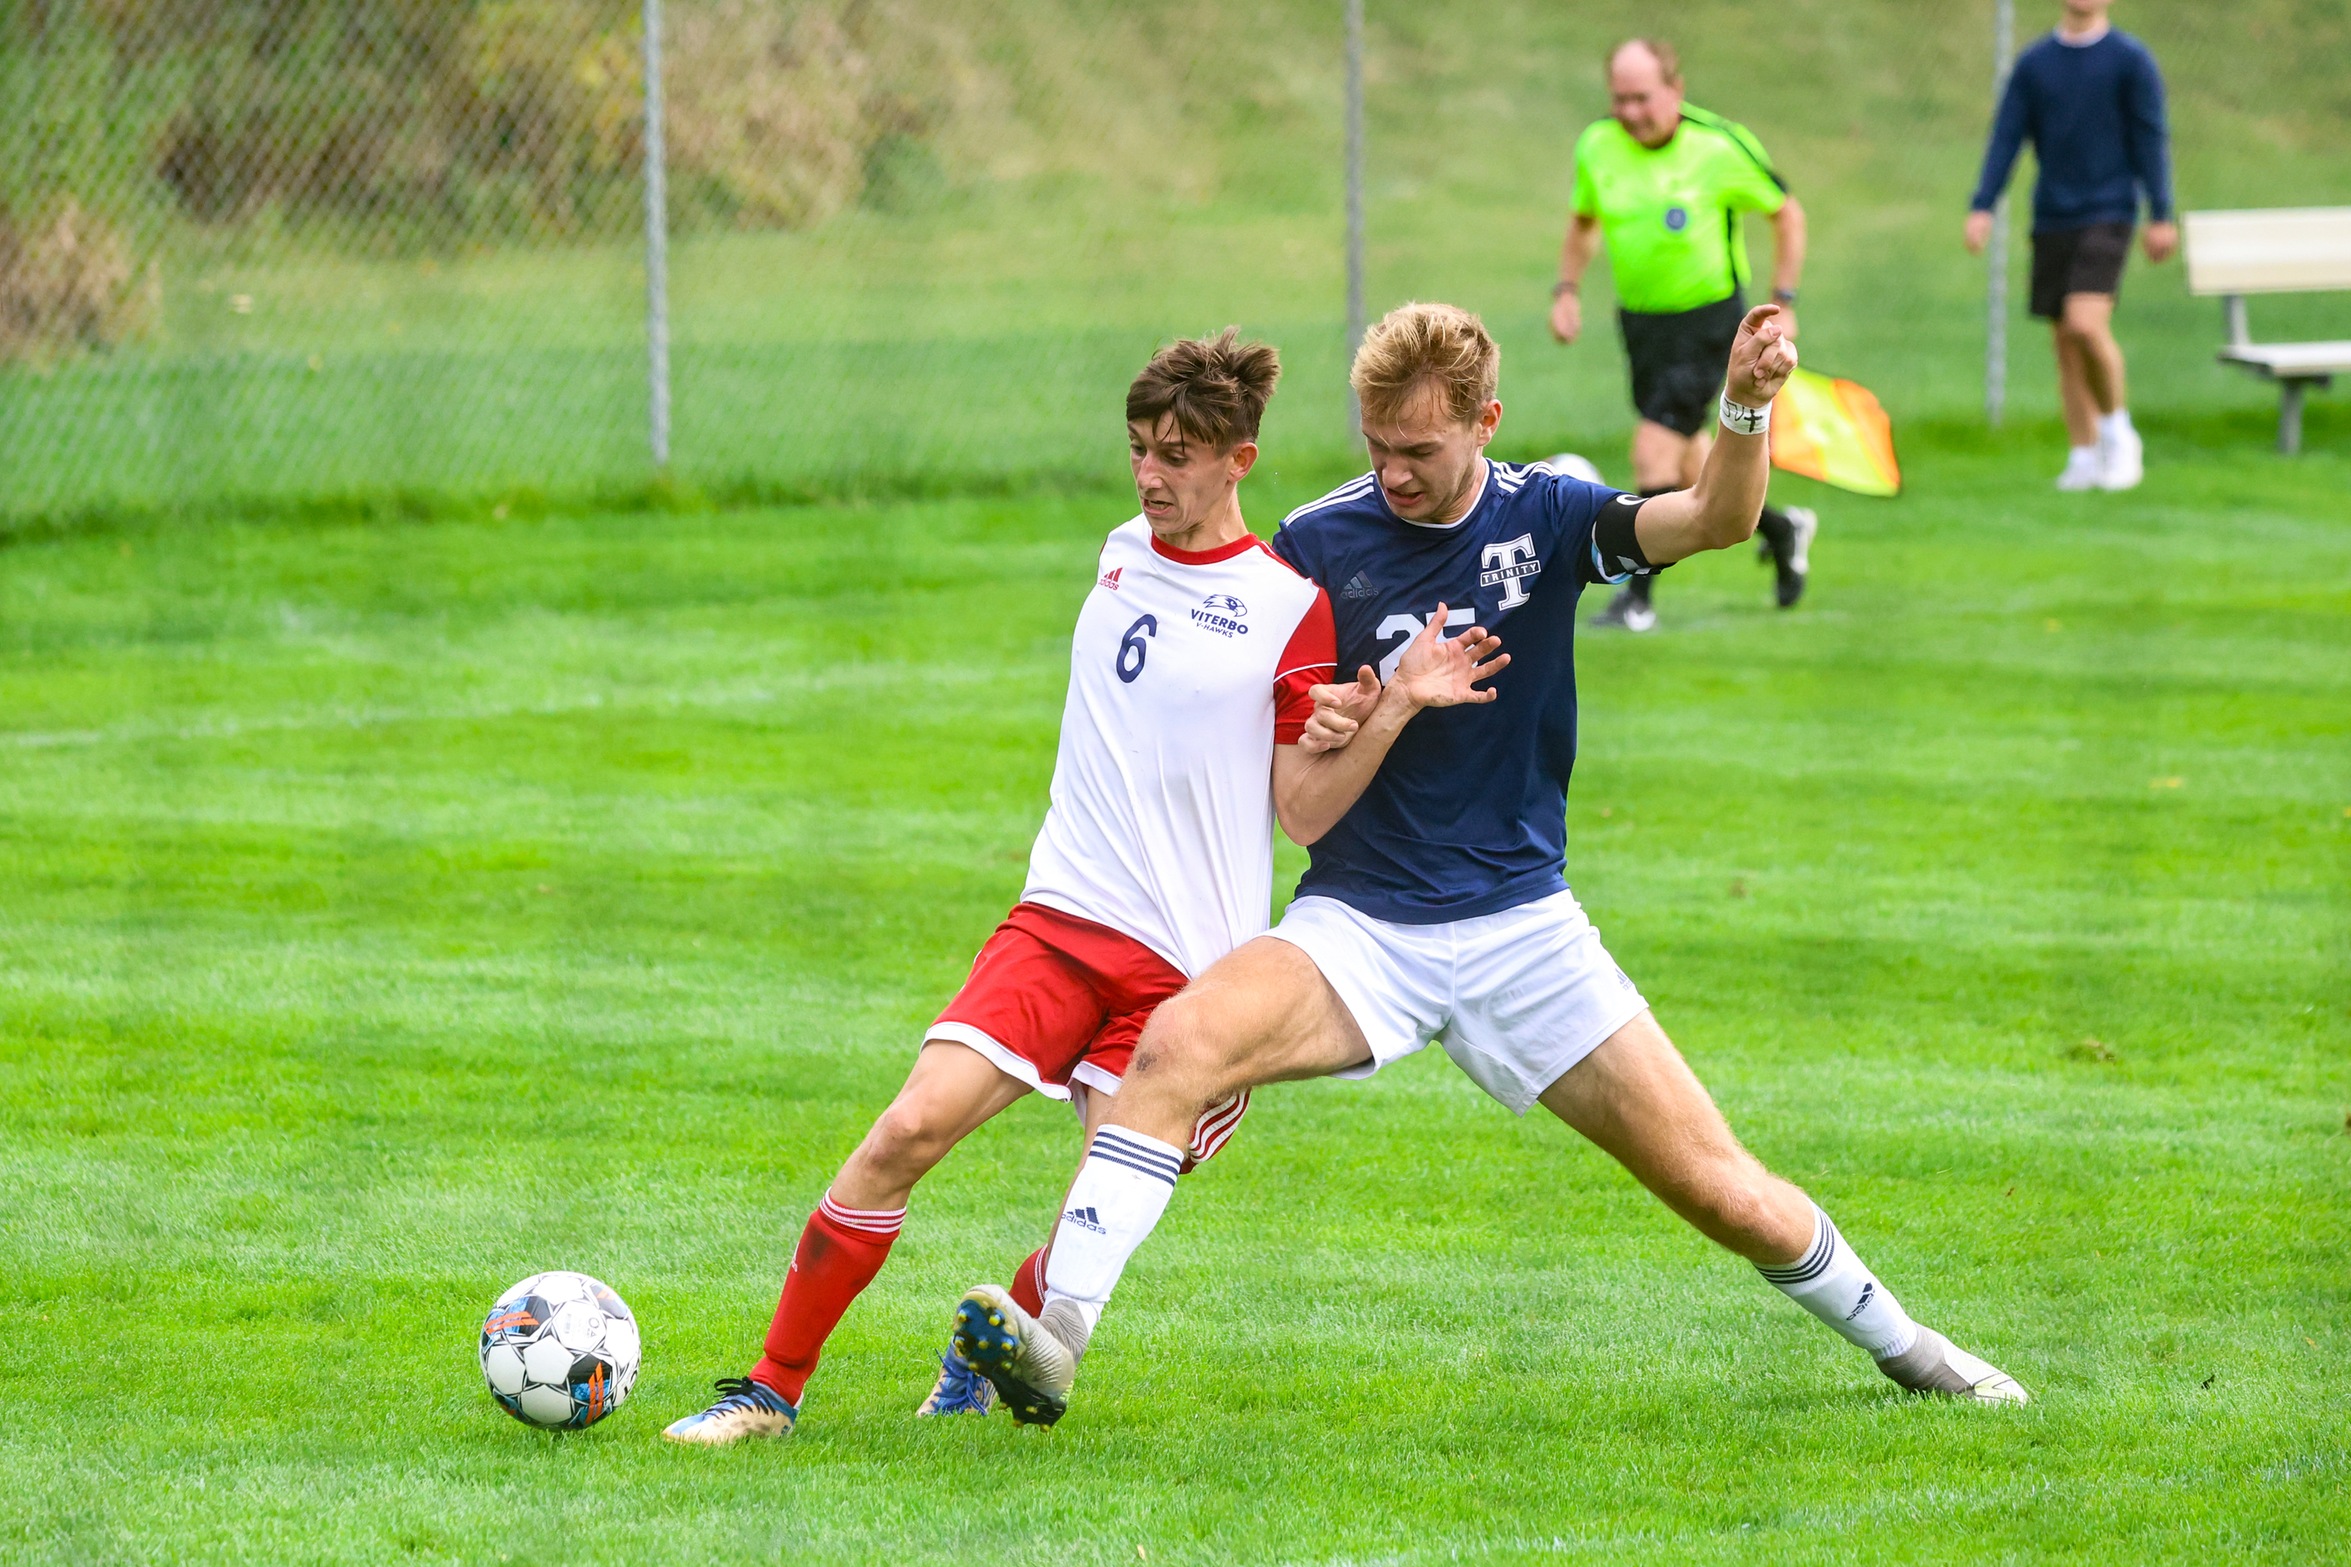 Gyurkovits Scores Late to Seal Draw at Holy Cross